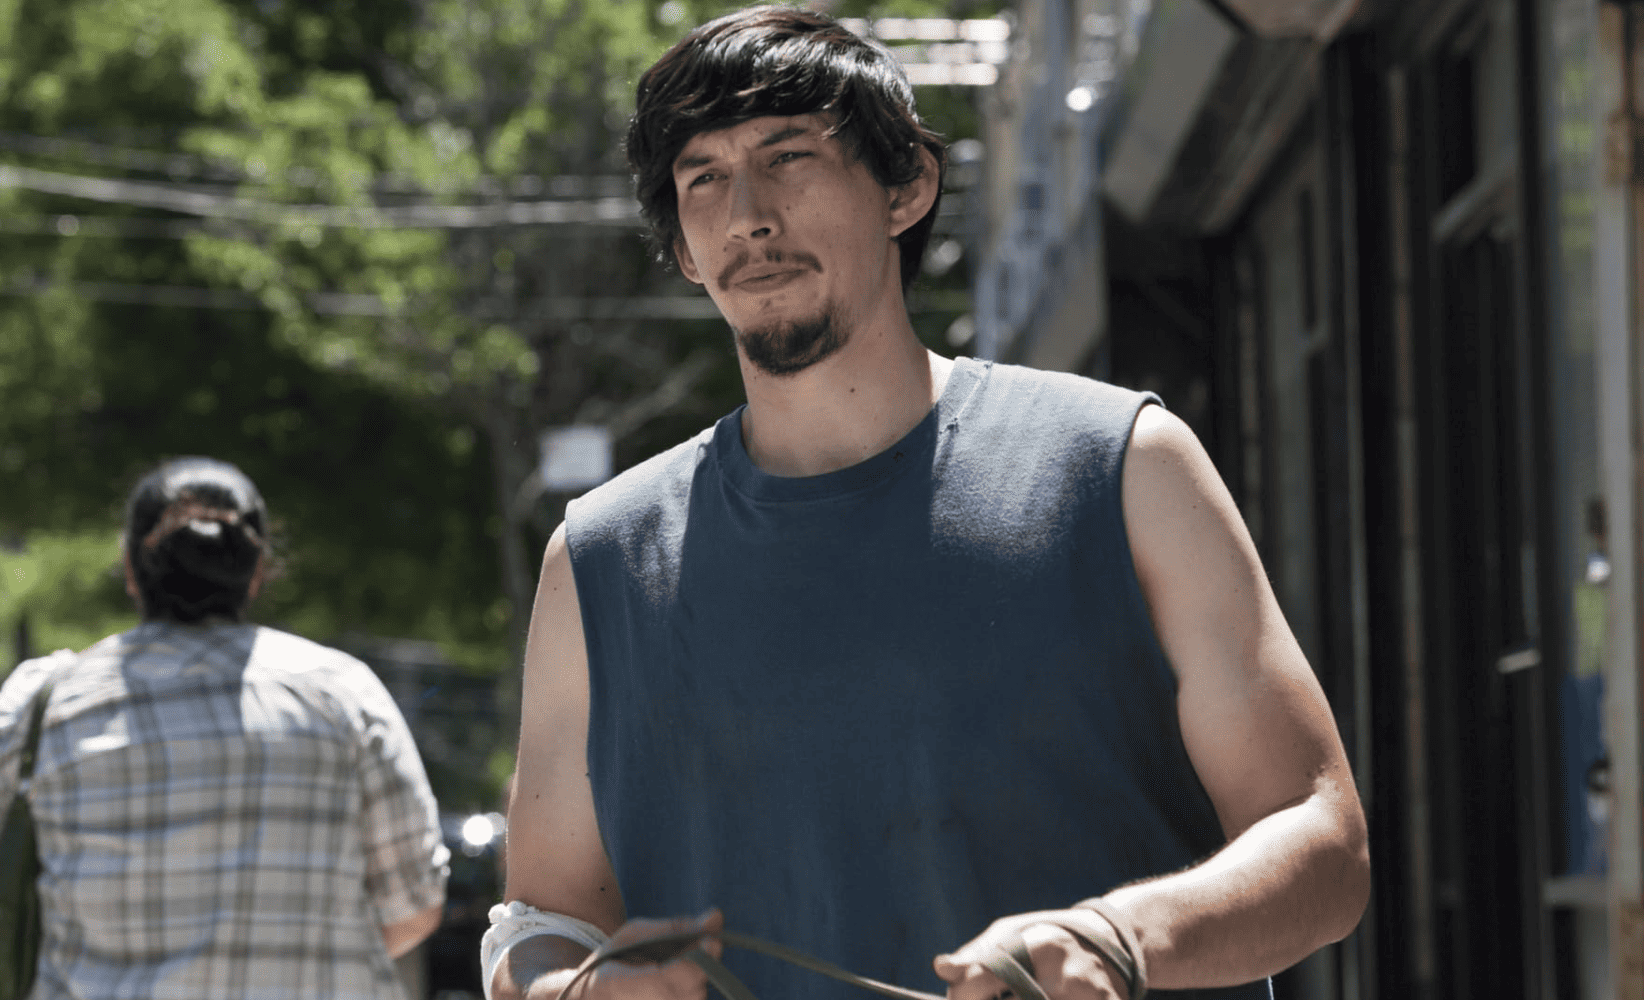 Adam Driver in character walking some dogs and wearing a tank top in this image from Apatow Productions